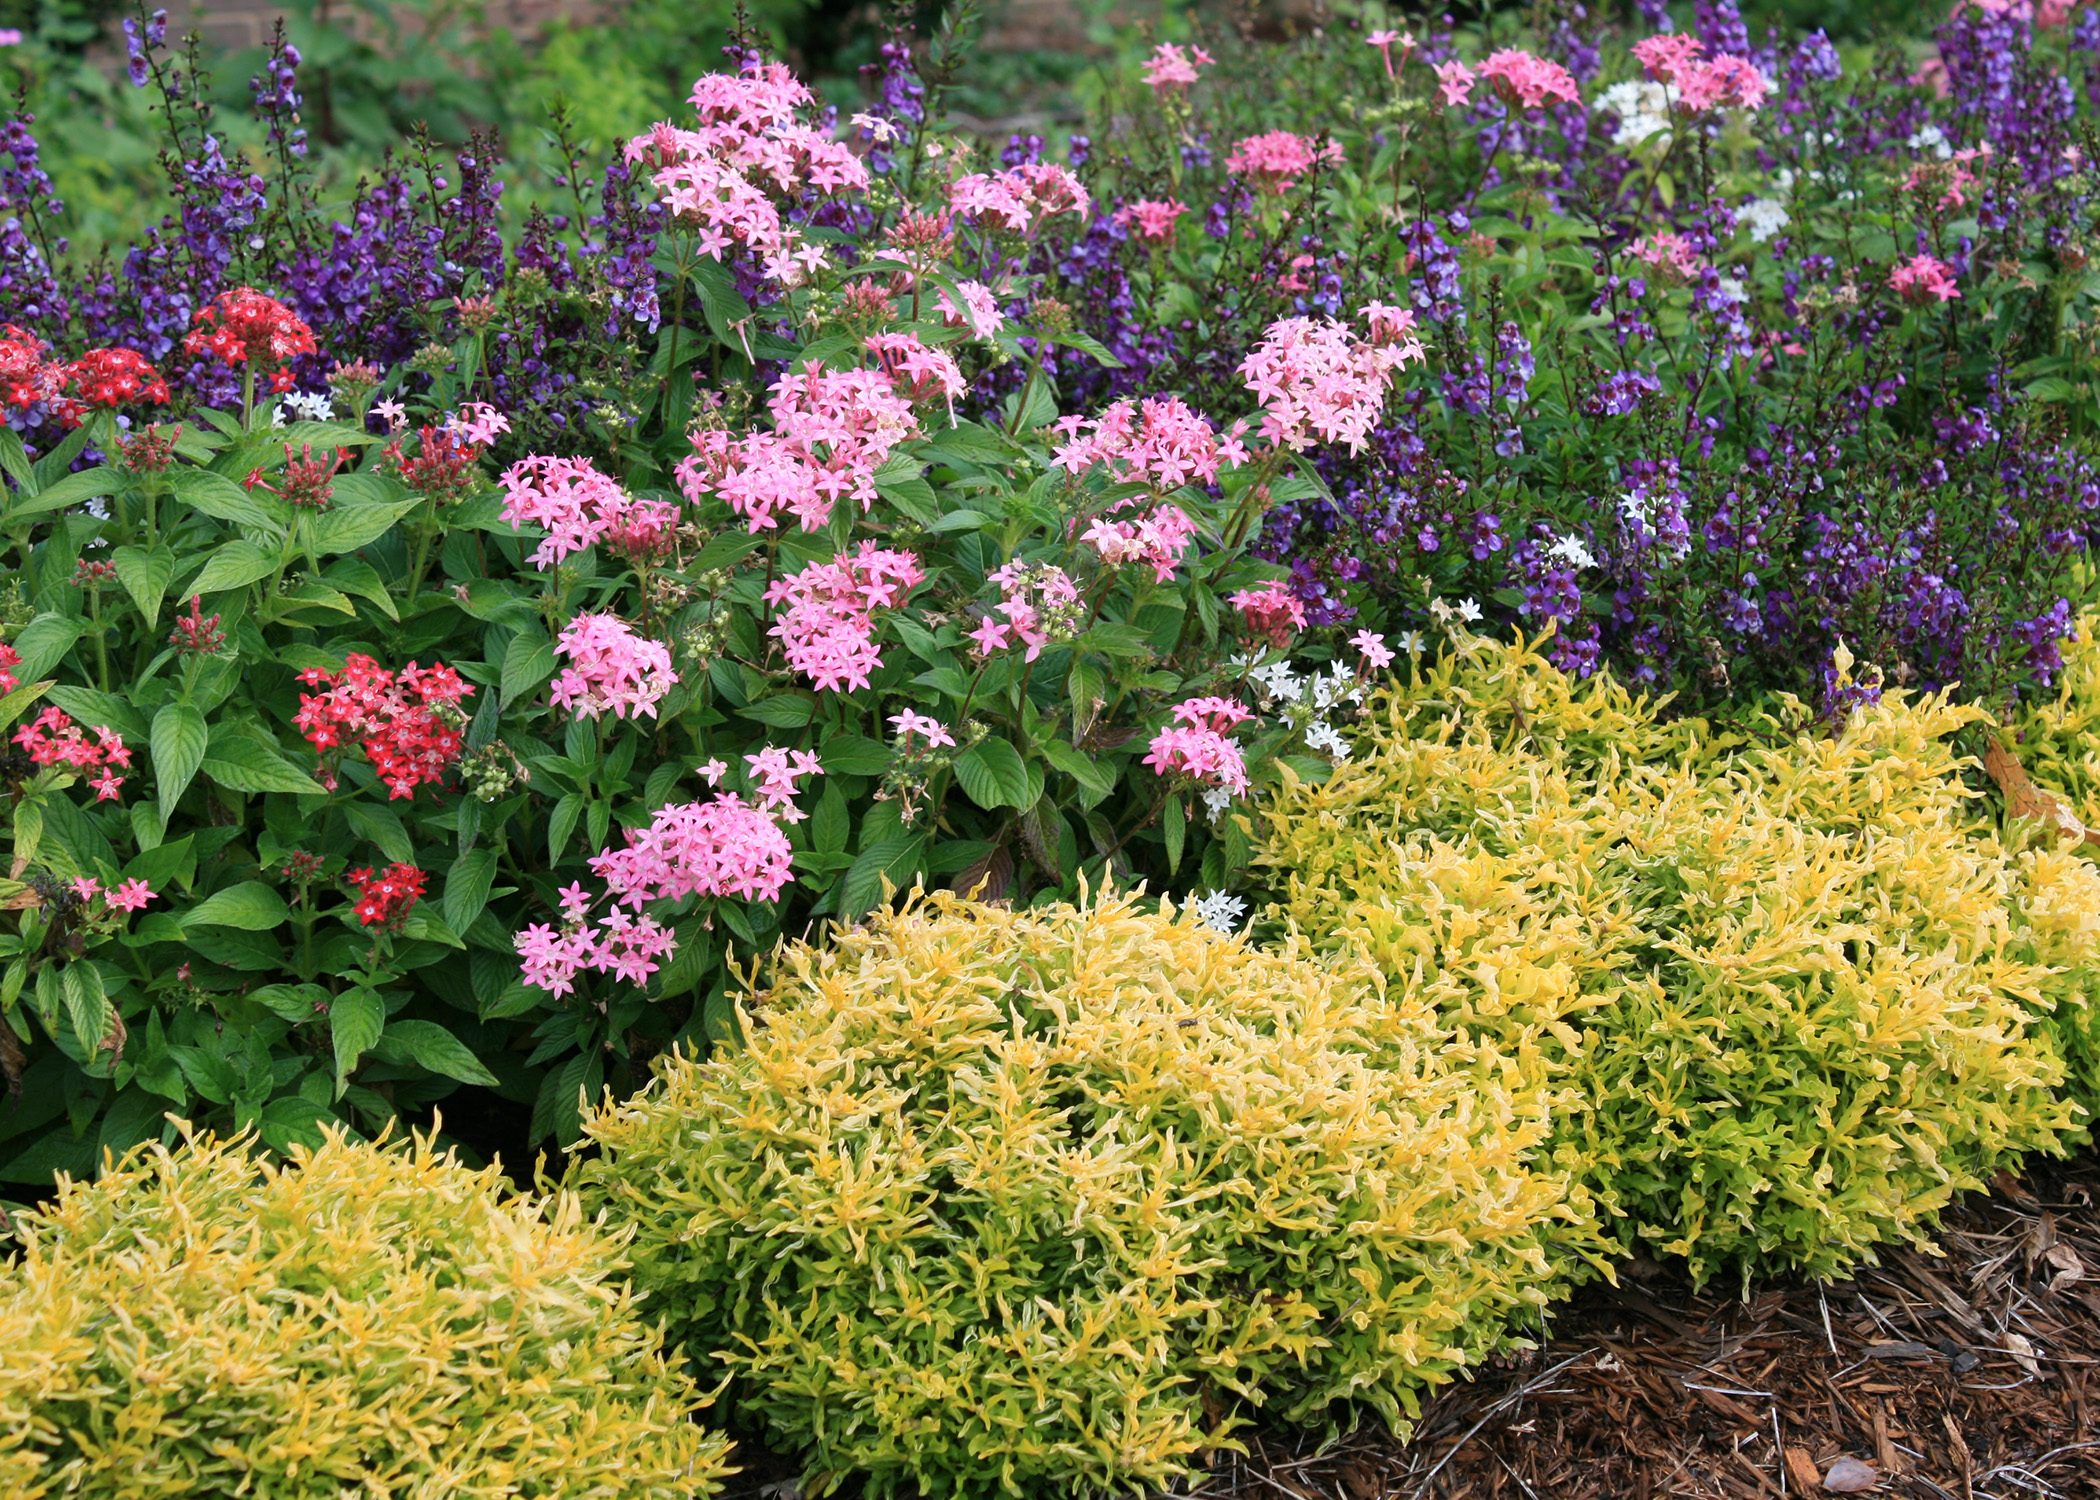 Gold Threads Alternanthera has banana-yellow foliage with delicate green lacing. It forms small mounds and can be used to edge a landscape bed. (Photo by MSU Extension/Gary Bachman)